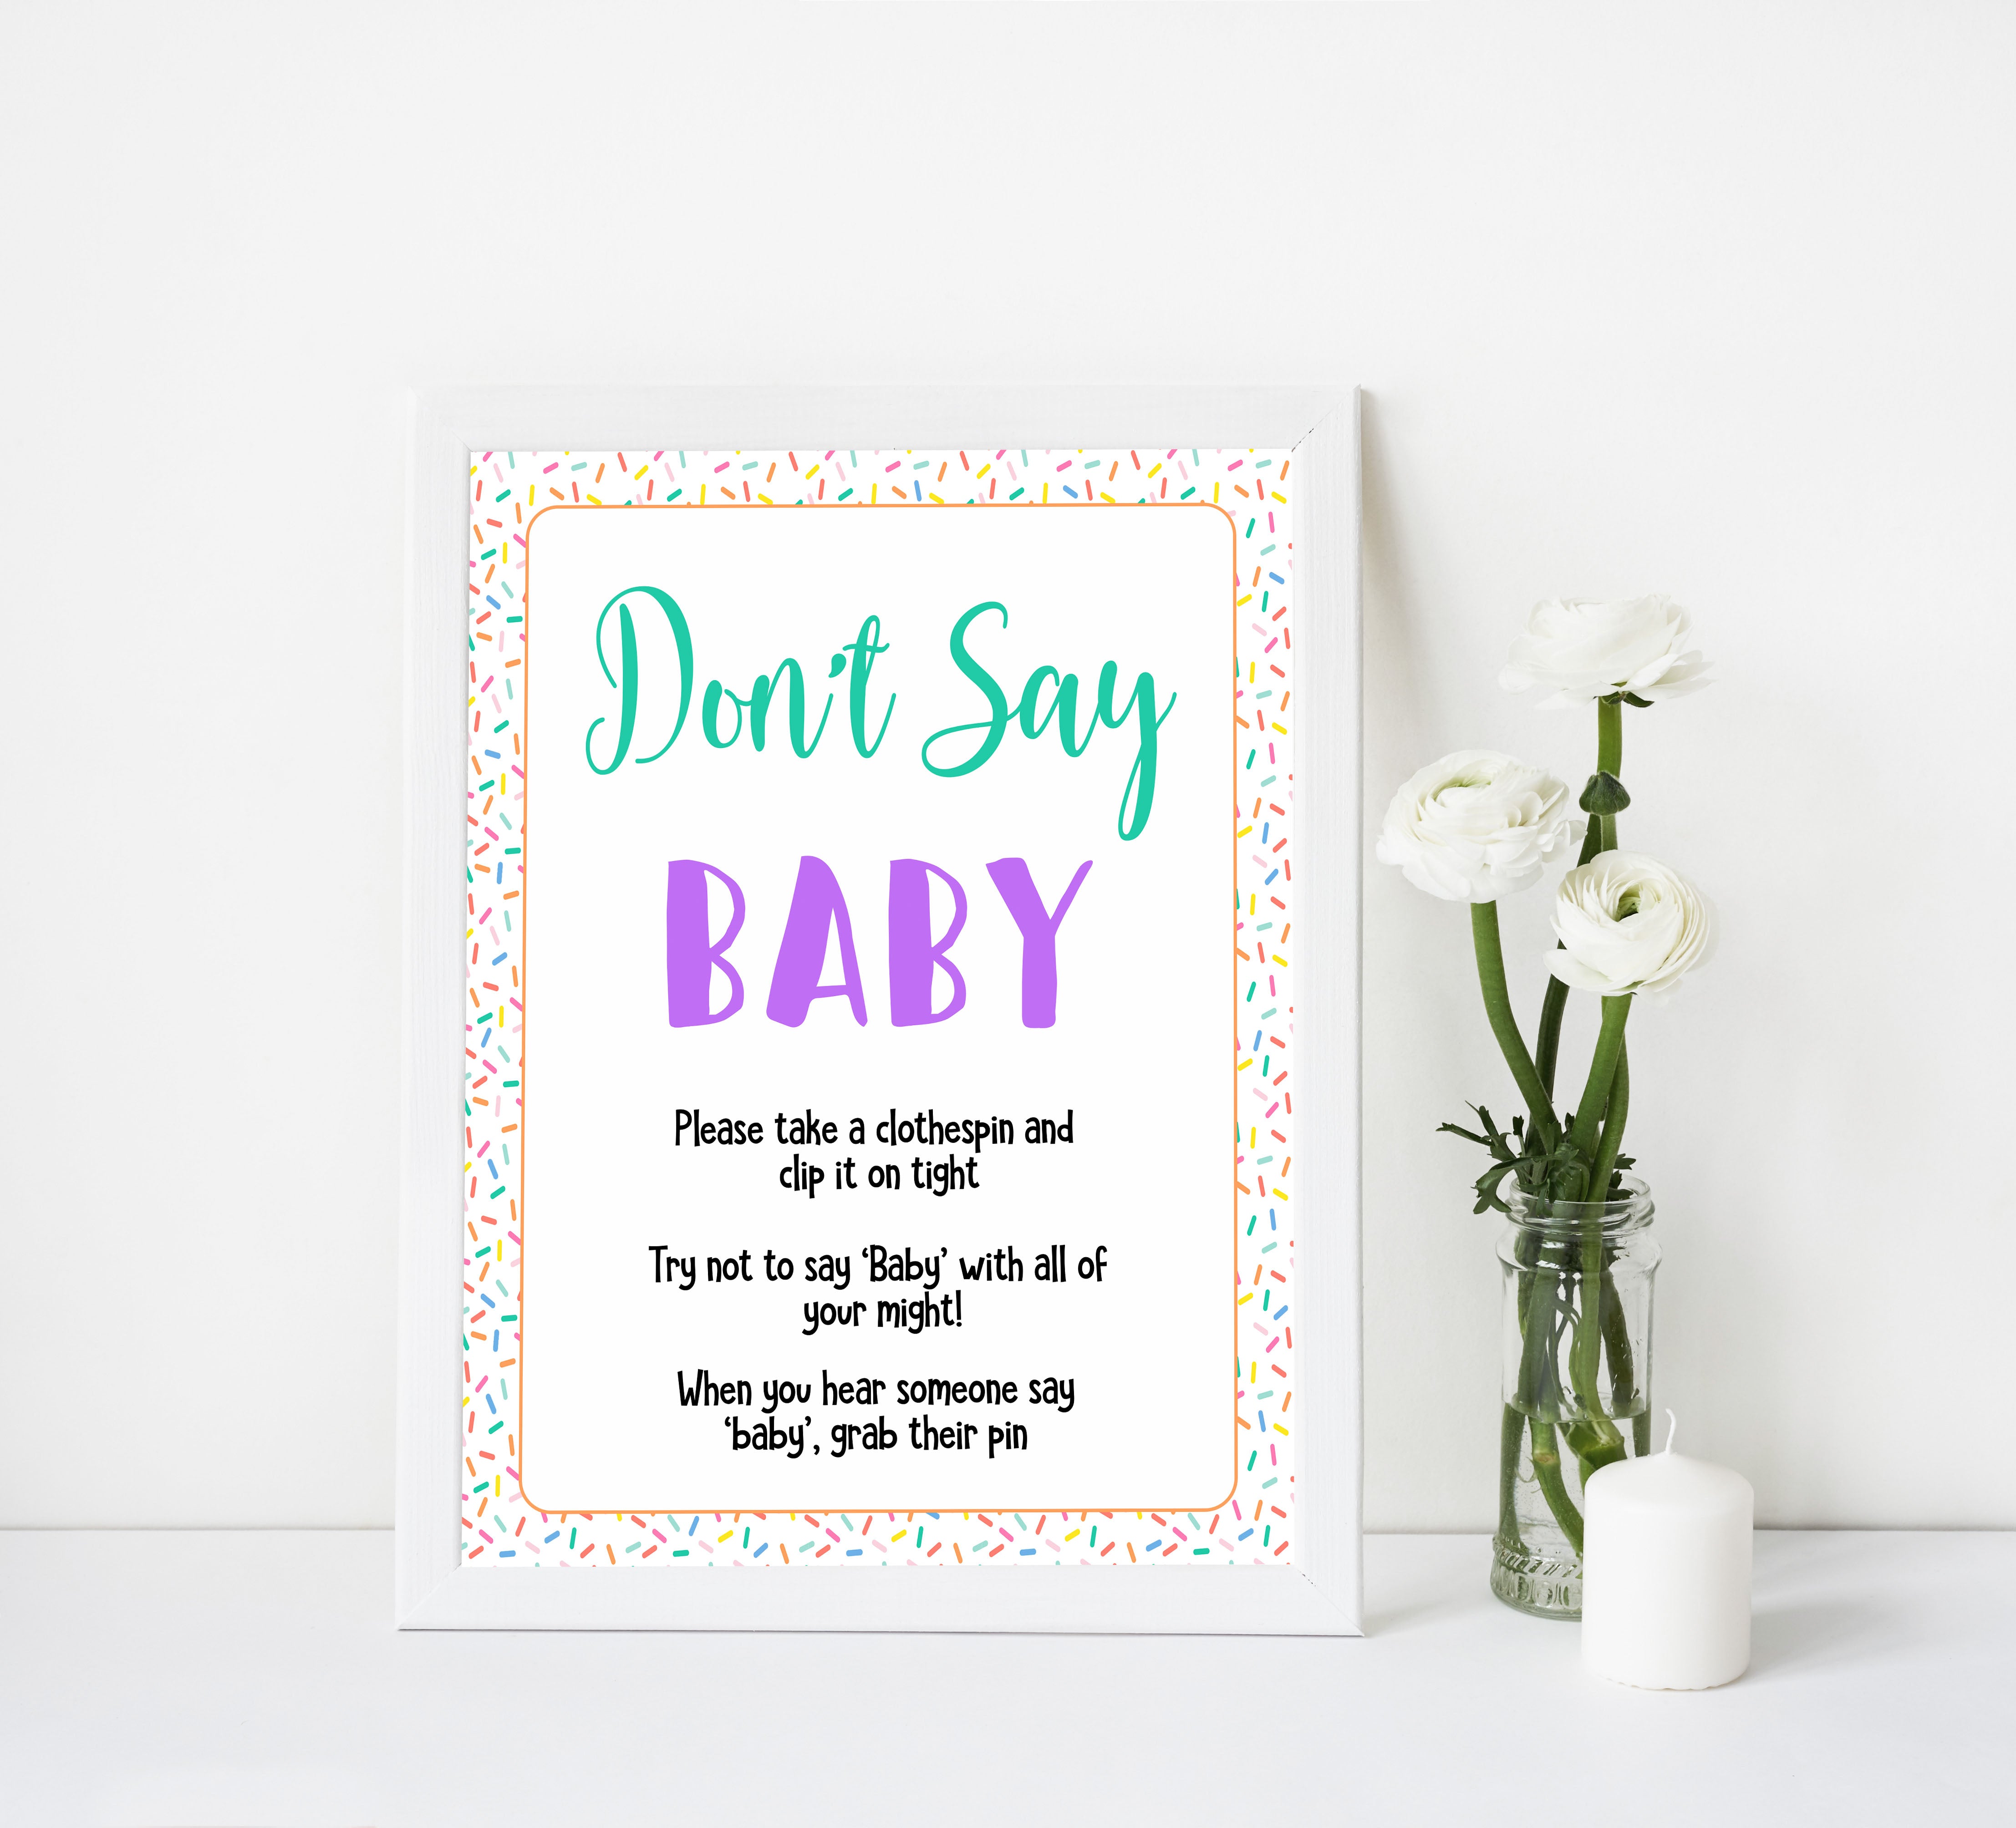 dont say baby game, Printable baby shower games, baby sprinkle fun baby games, baby shower games, fun baby shower ideas, top baby shower ideas, sprinkle shower baby shower, friends baby shower ideas